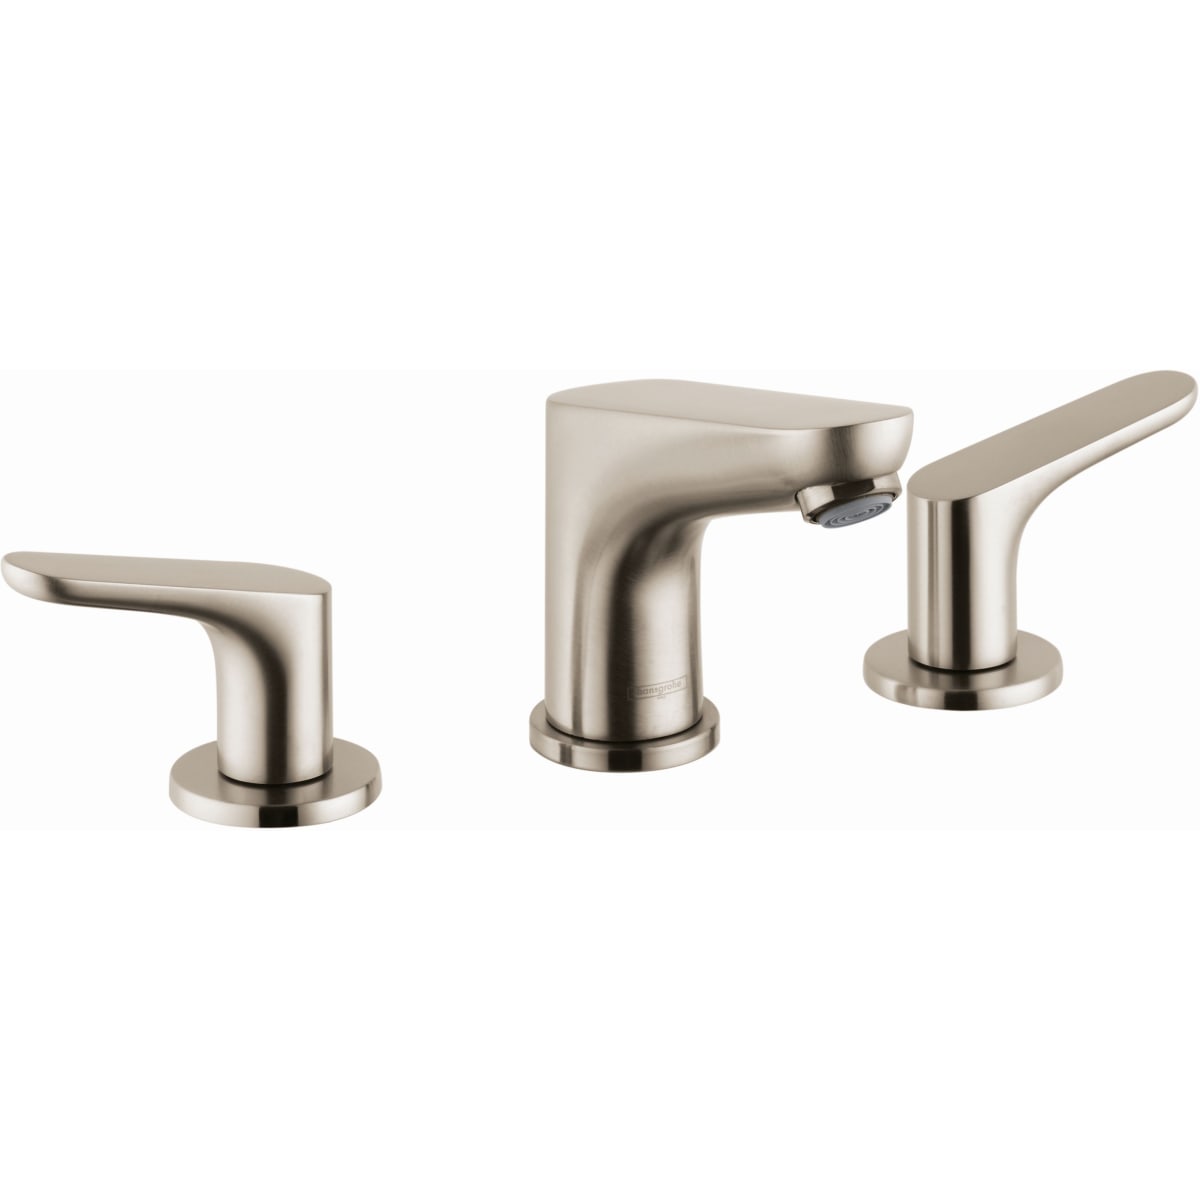 Hansgrohe 04369820 Brushed Nickel Focus 1 2 Gpm Widespread